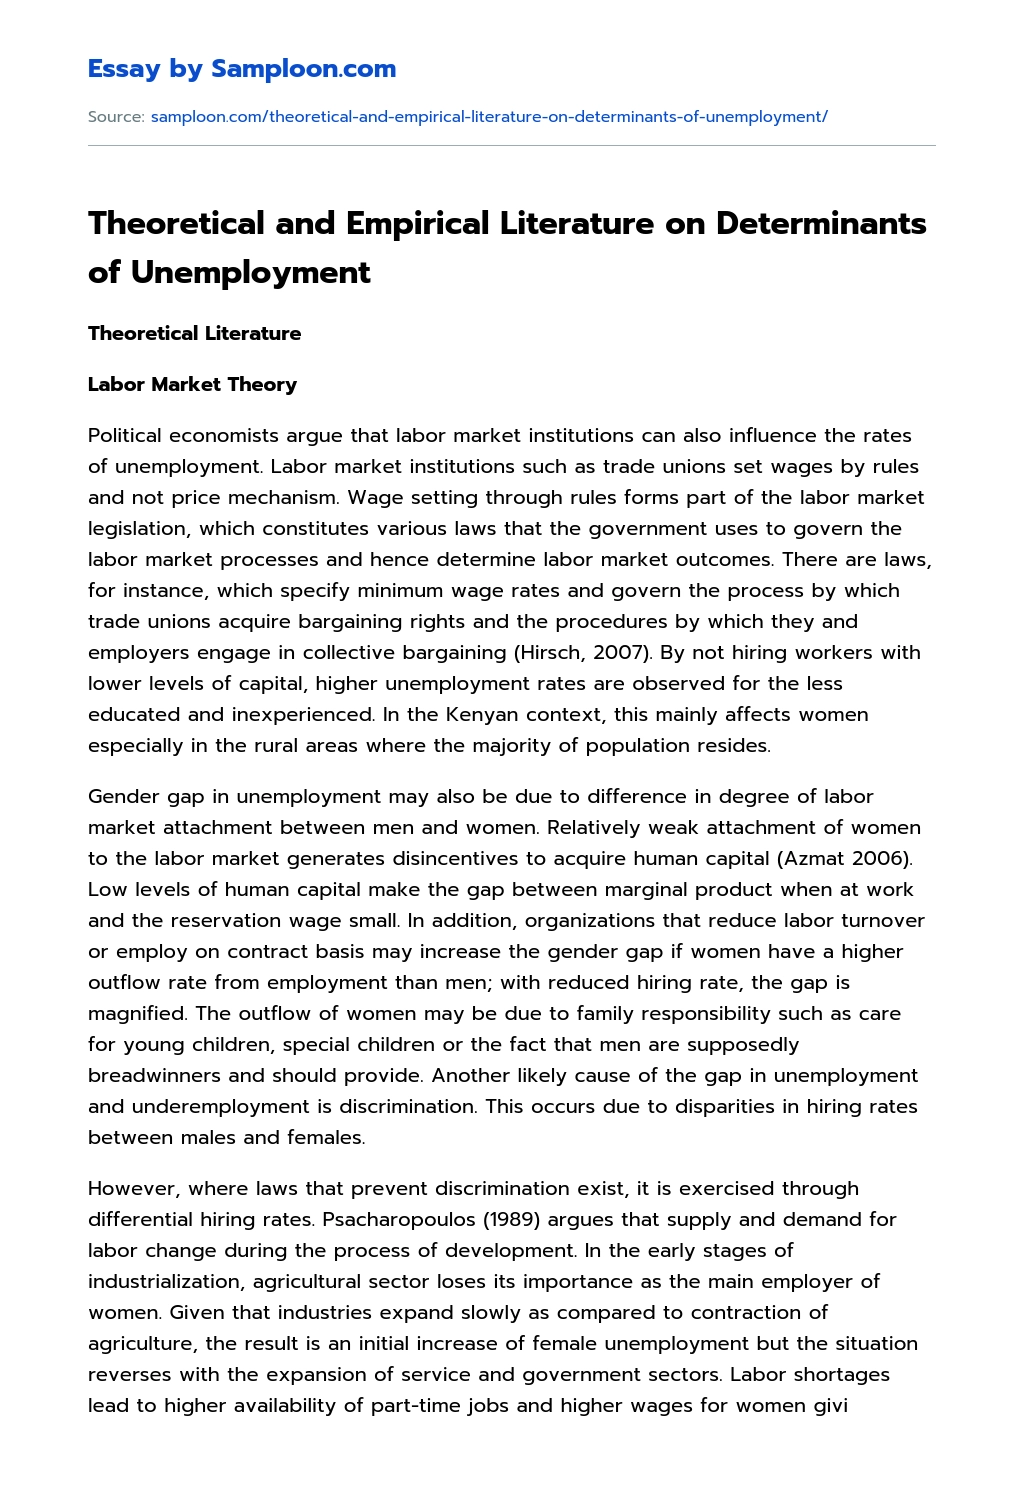 Theoretical and Empirical Literature on Determinants of Unemployment Review essay